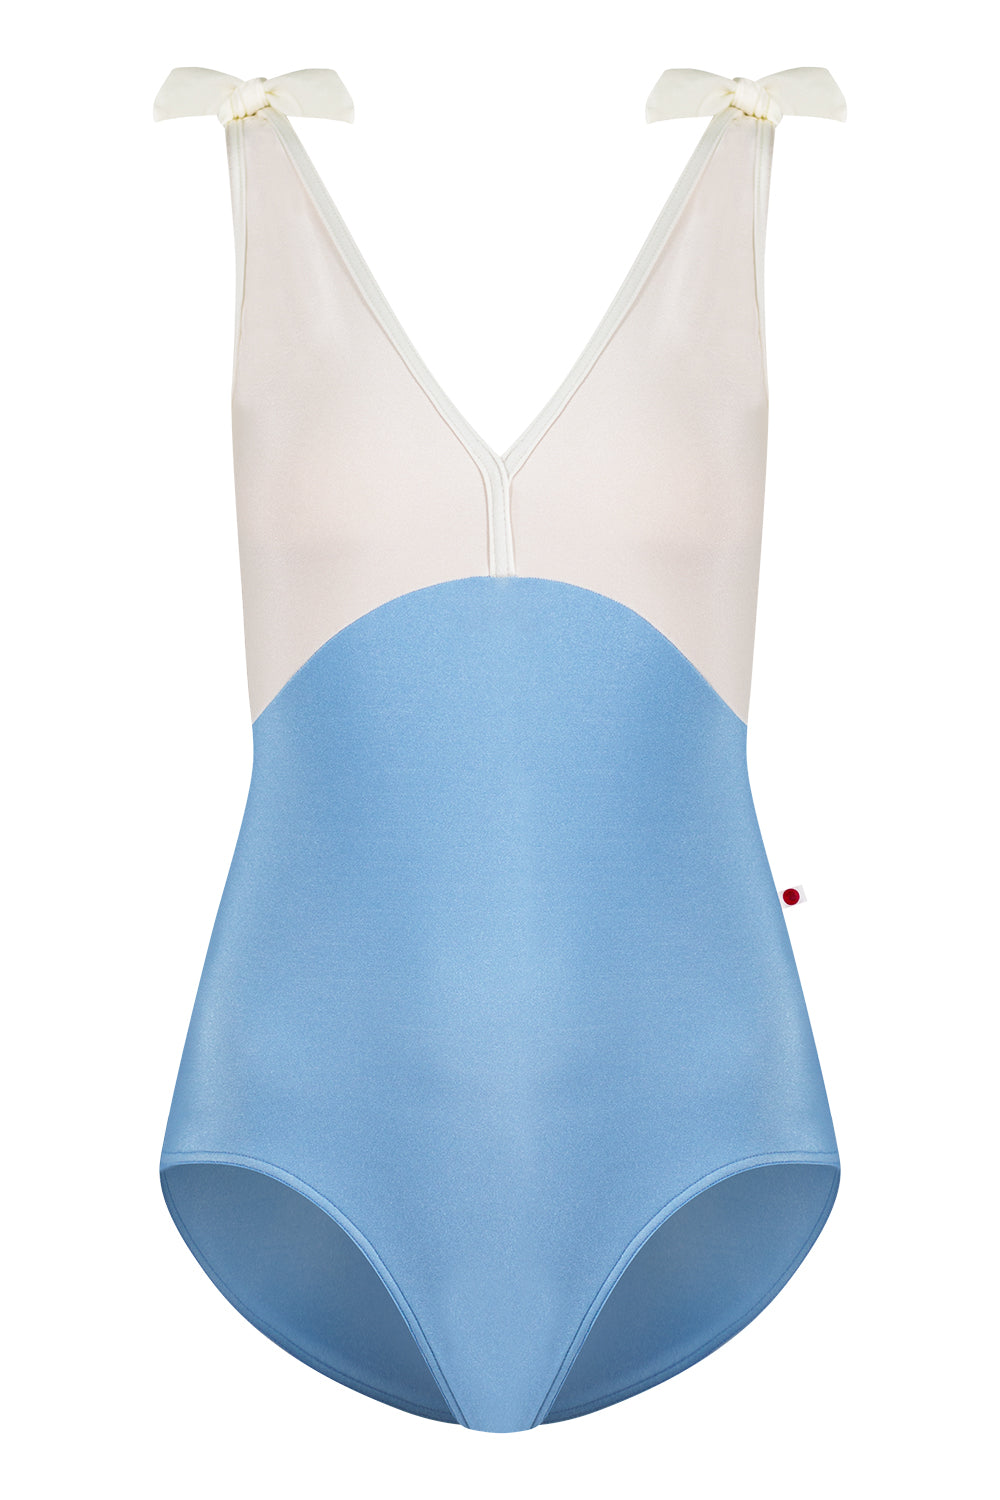 Alicia leotard in N-Moontide body color with N-Antique top & trim color and matching shoulder bows